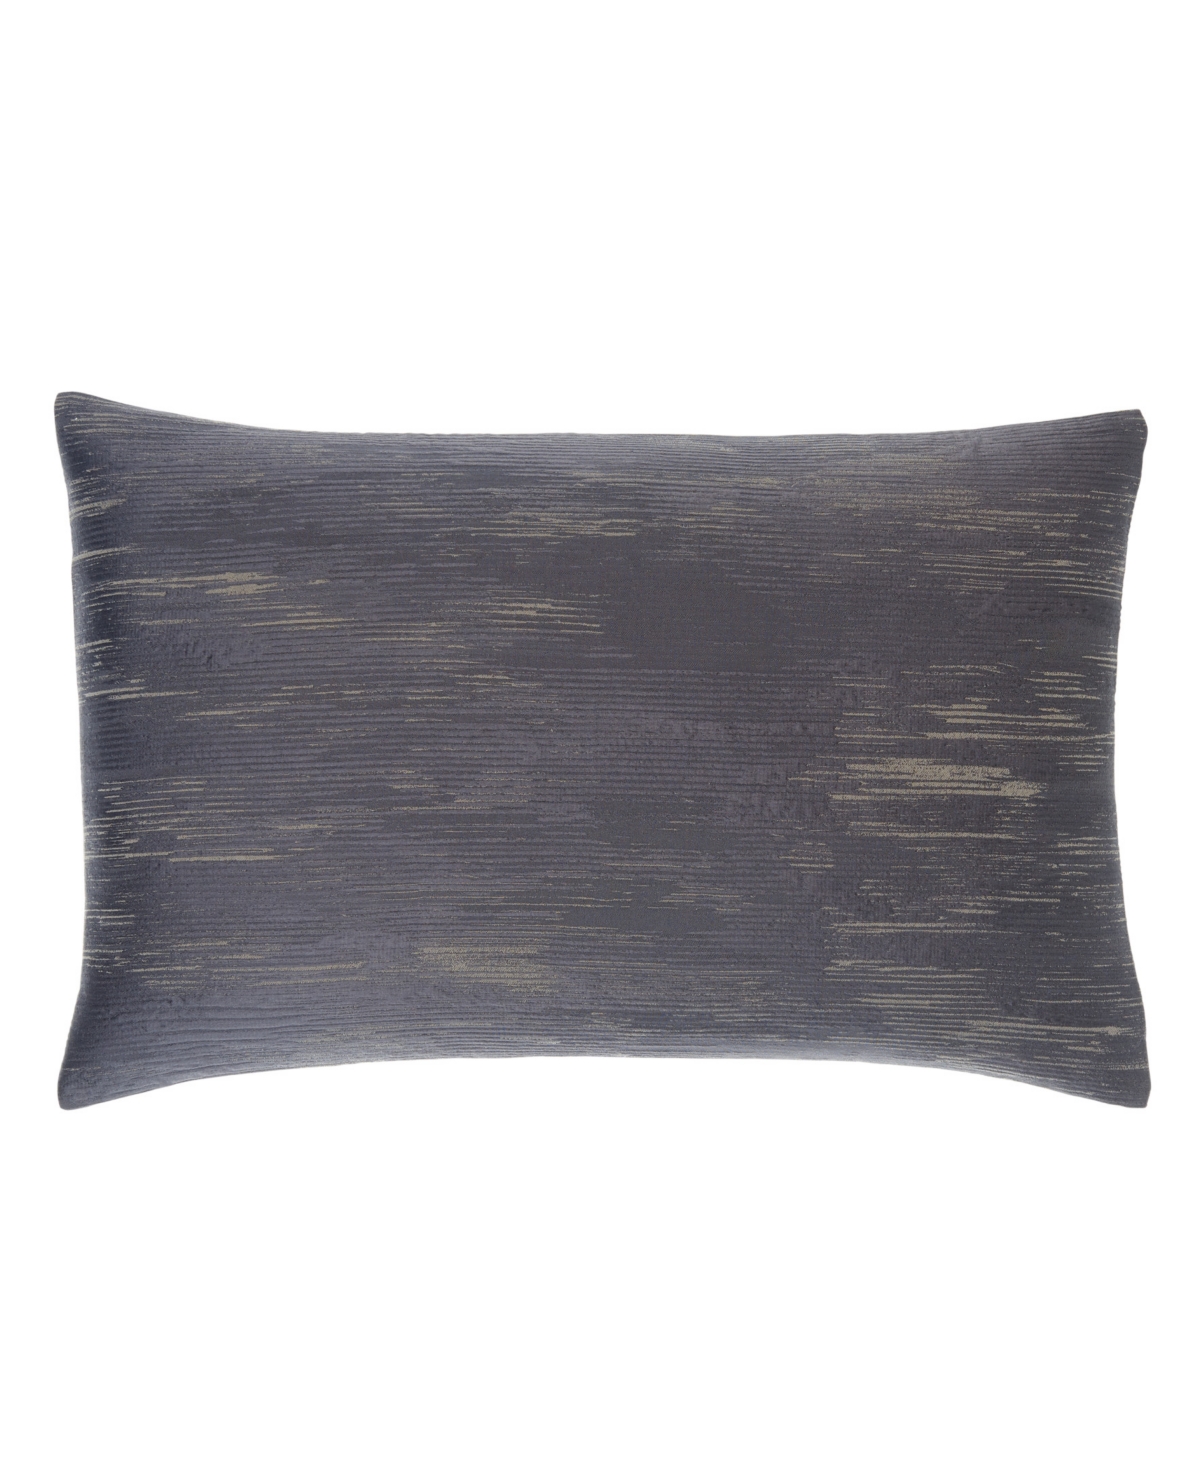 Collection Gravity Sham, King - Charcoal